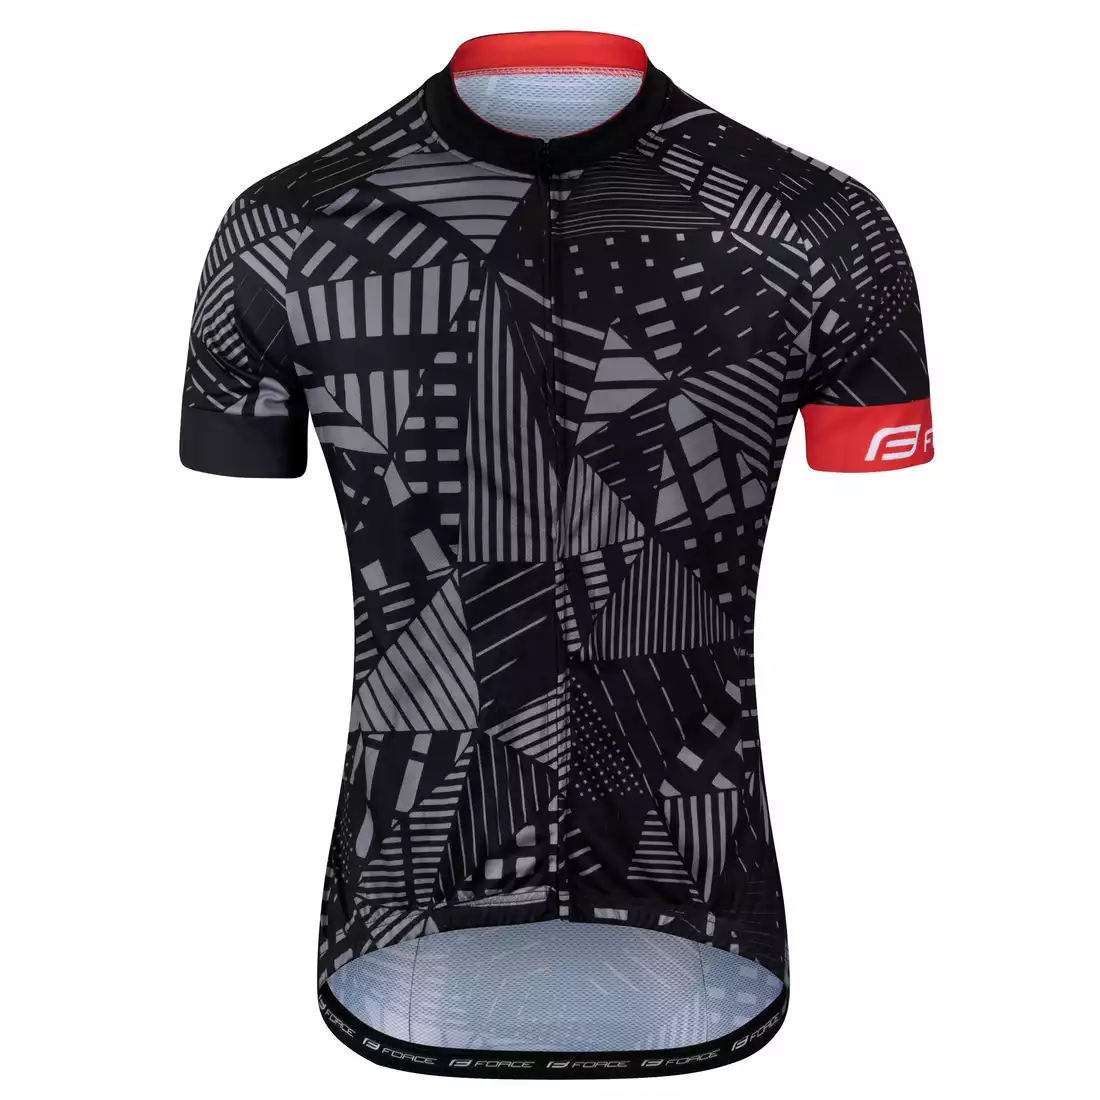 FORCE SHARD Cycling jersey, black and gray